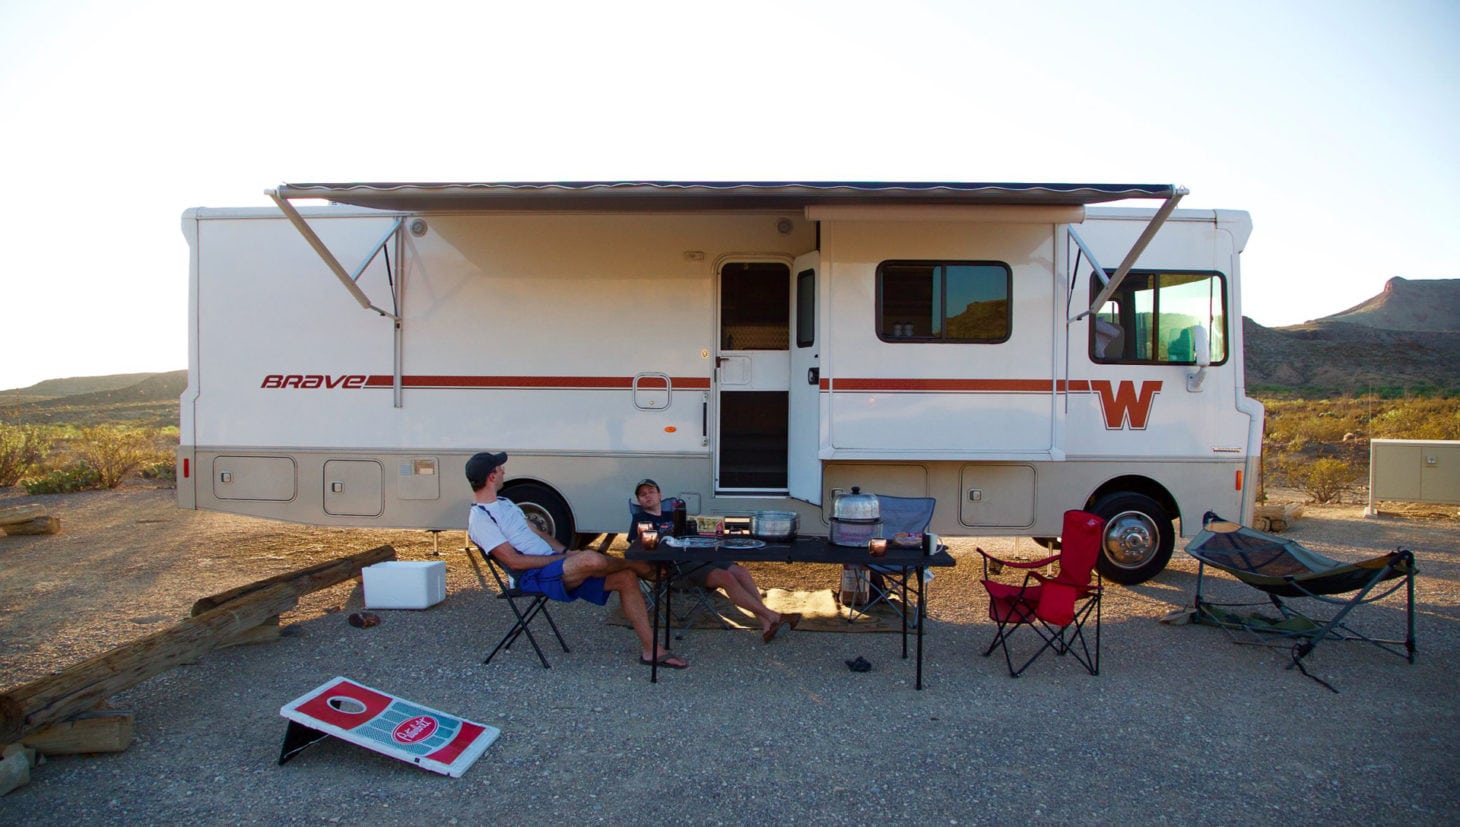 Two people outside rv while camping without hookups. Table and chair outdoor setup with games.